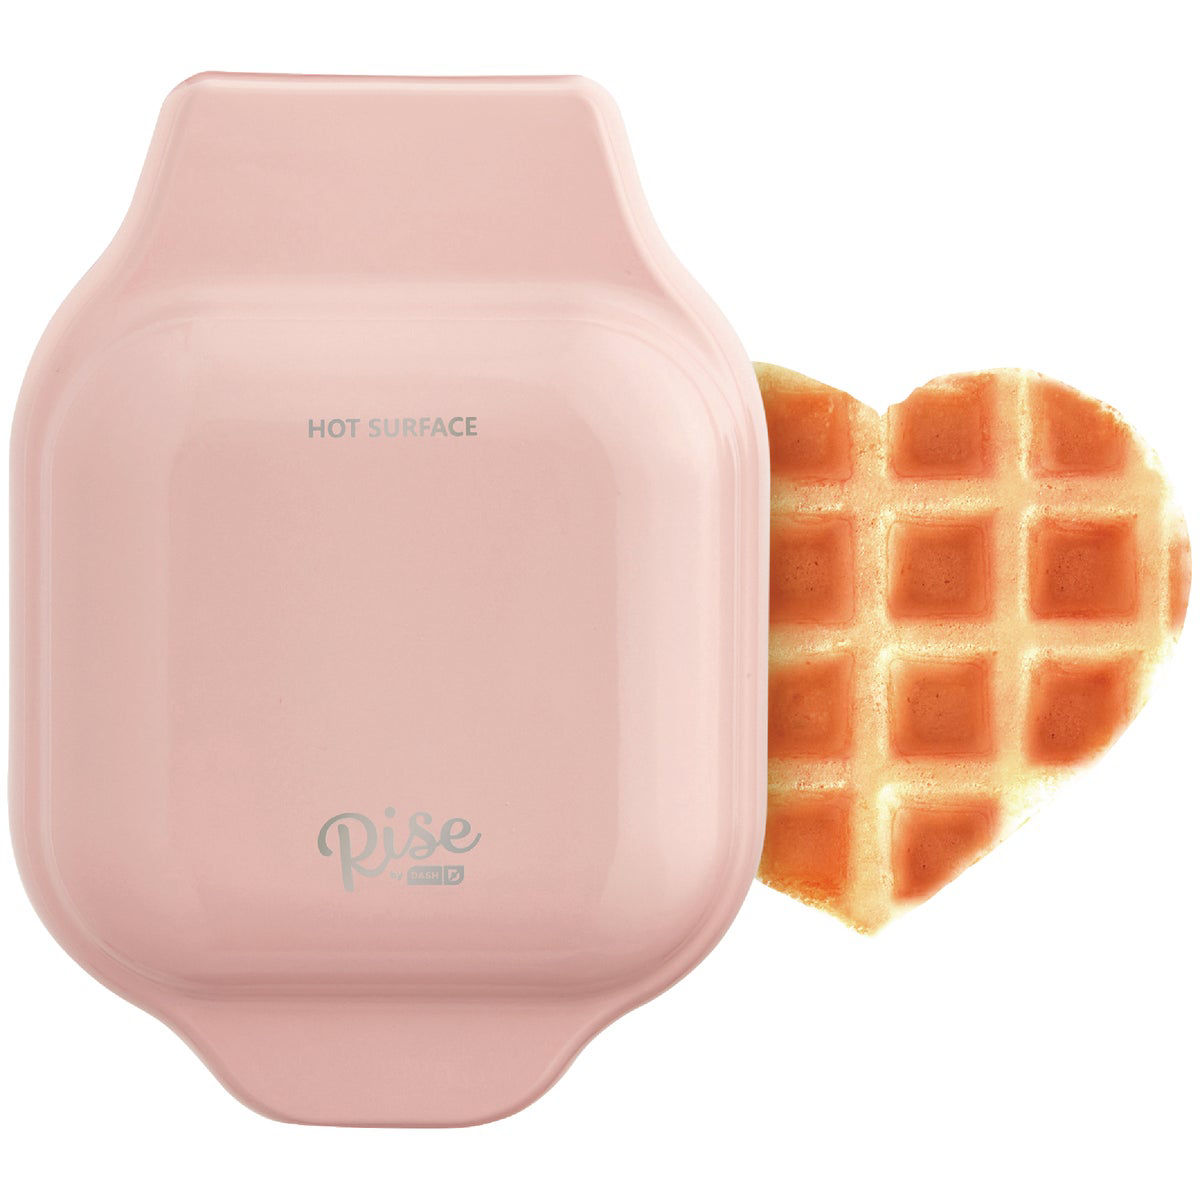 Dash Multi Mini Waffle Maker Review - Is This the Dash You've Been Waiting  For? 